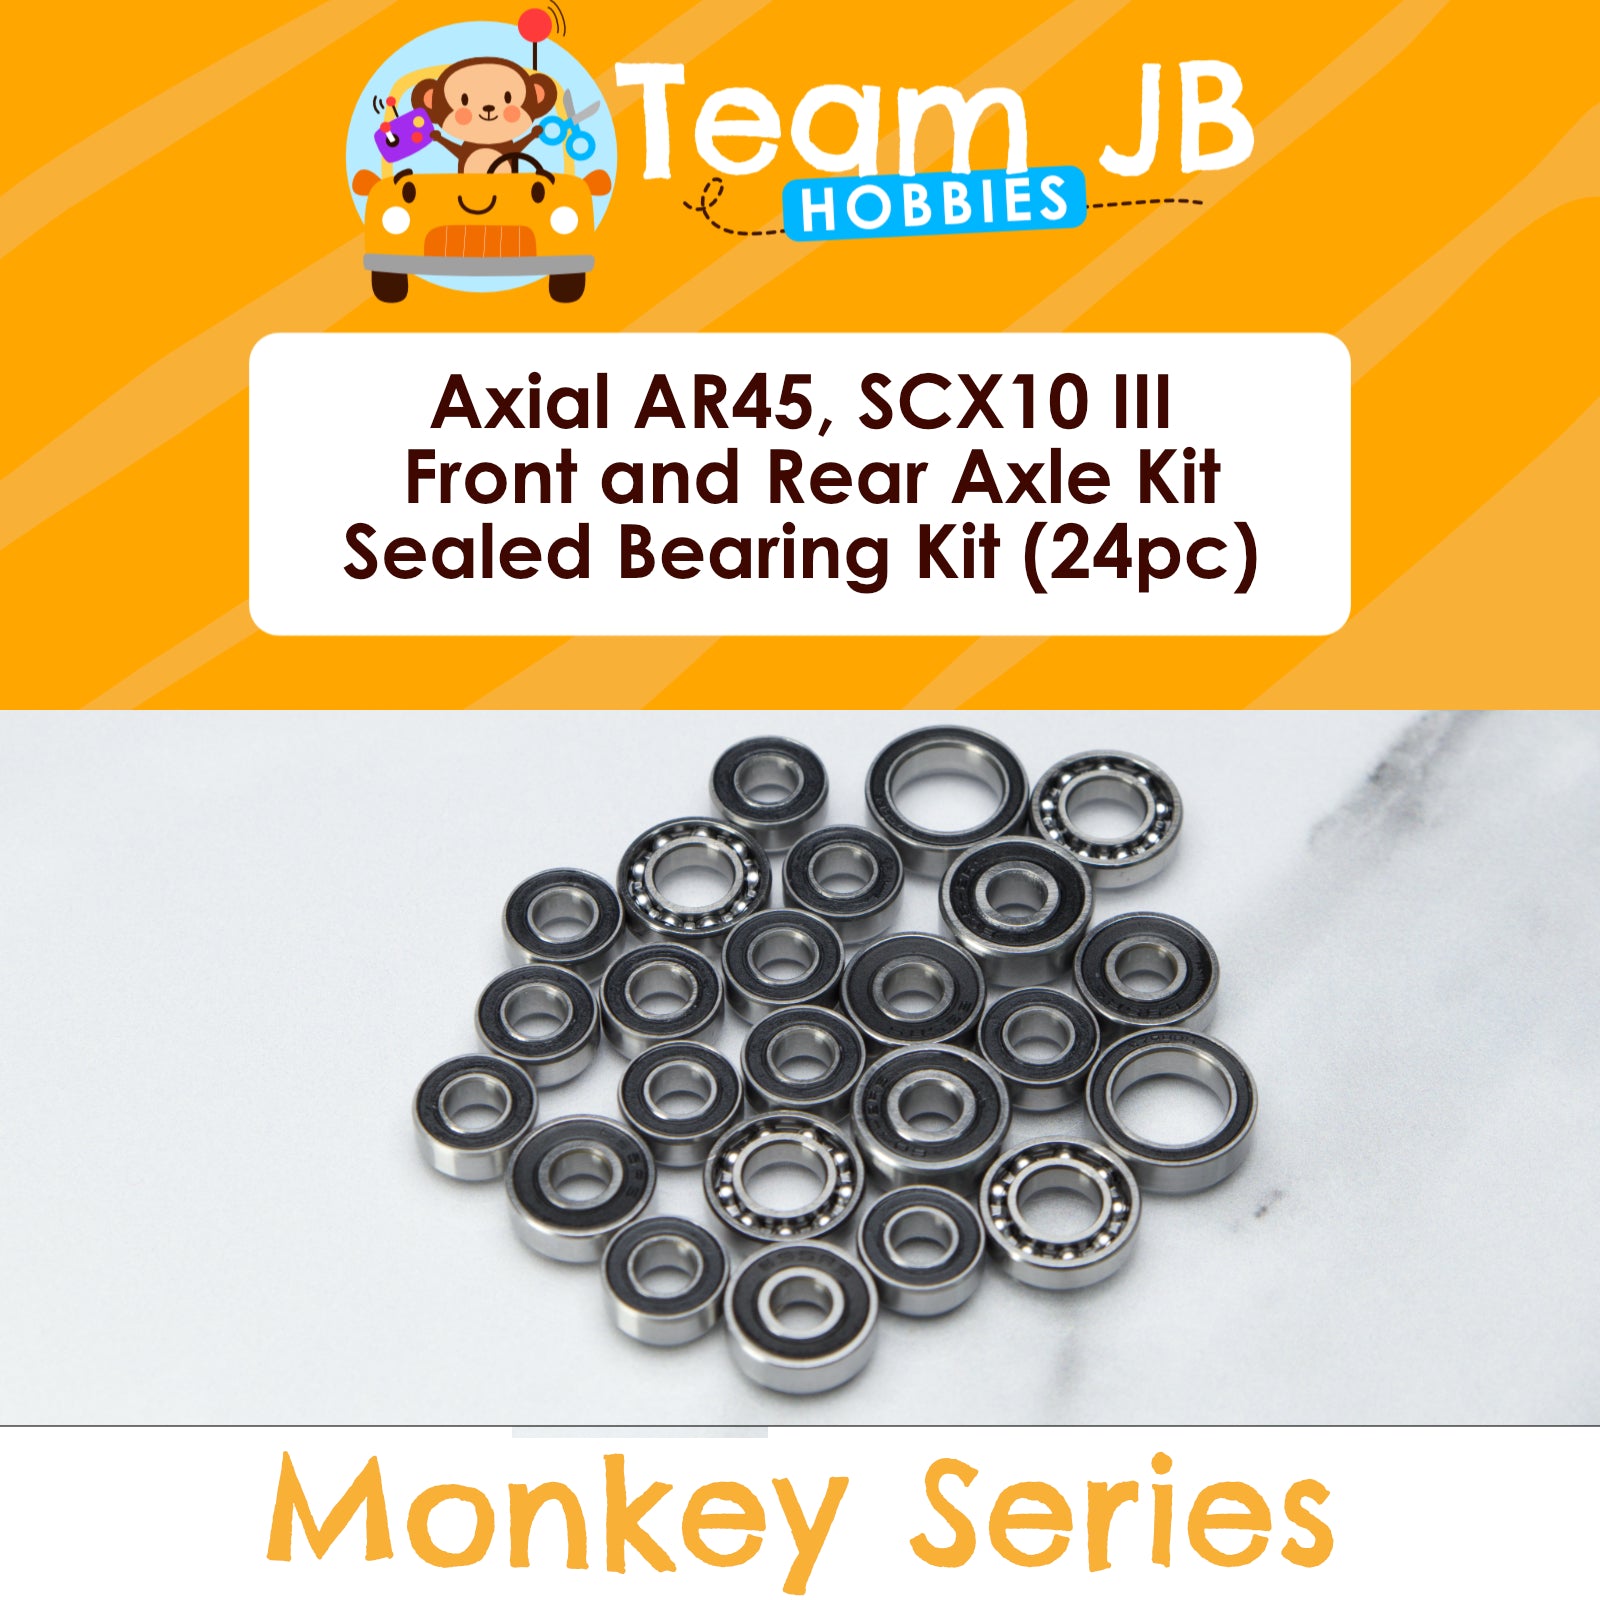 Axial AR45, SCX10 III Front and Rear Portal Axle Kit - Sealed Bearing Kit